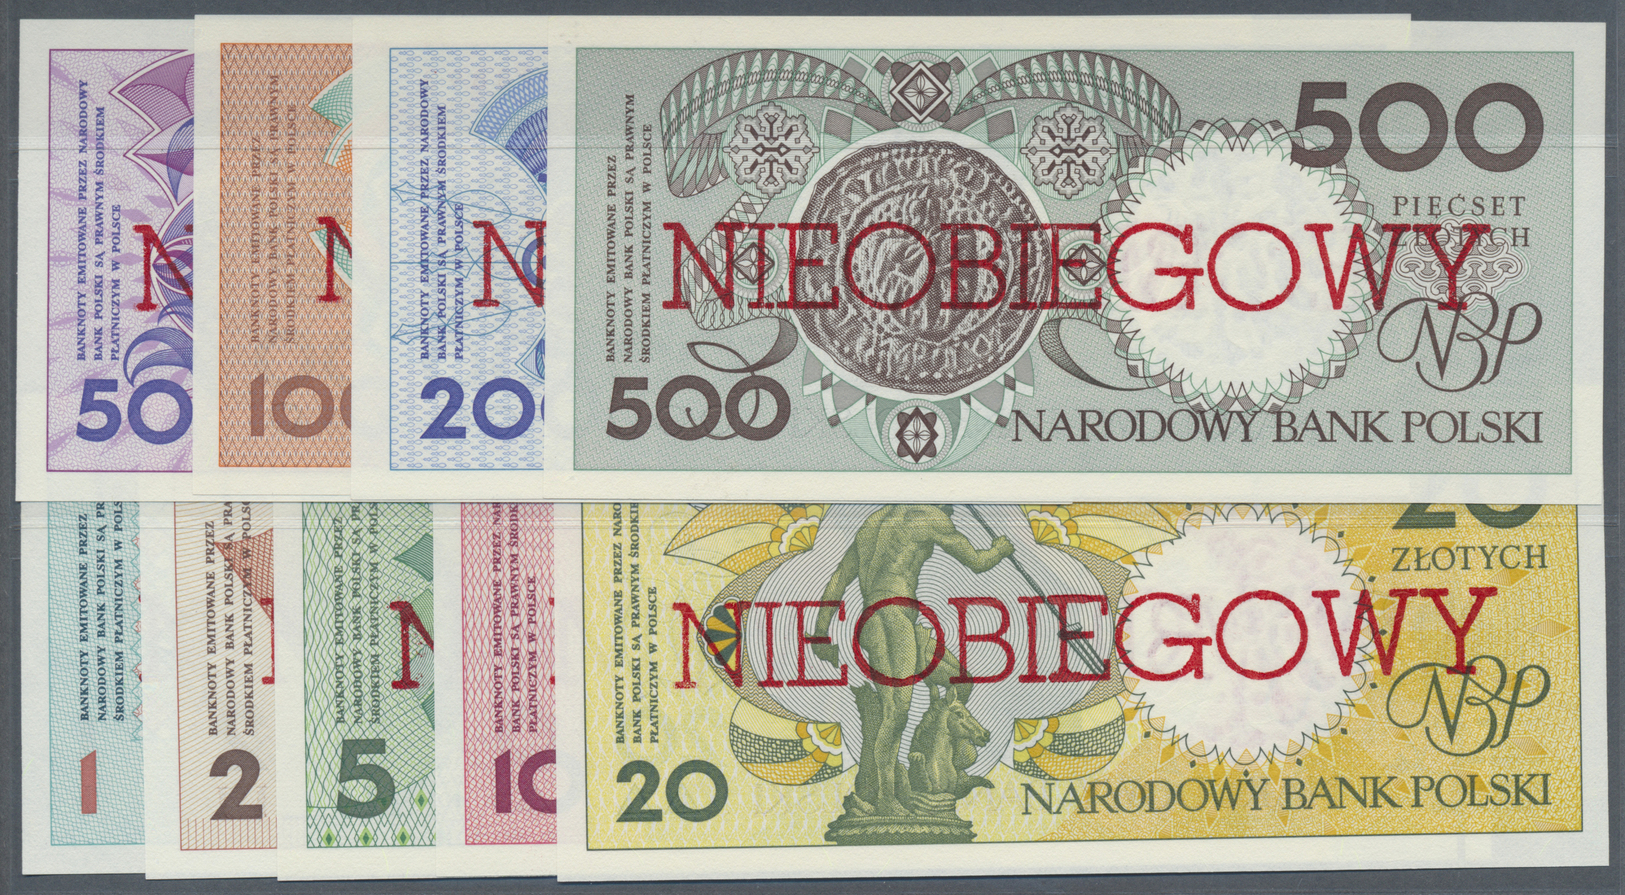 01995 Poland / Polen: Set Of 9 Notes Of An Unissued Series Of 1990 Overprinted "not Issued" (Nieobiegowy) Containing The - Poland